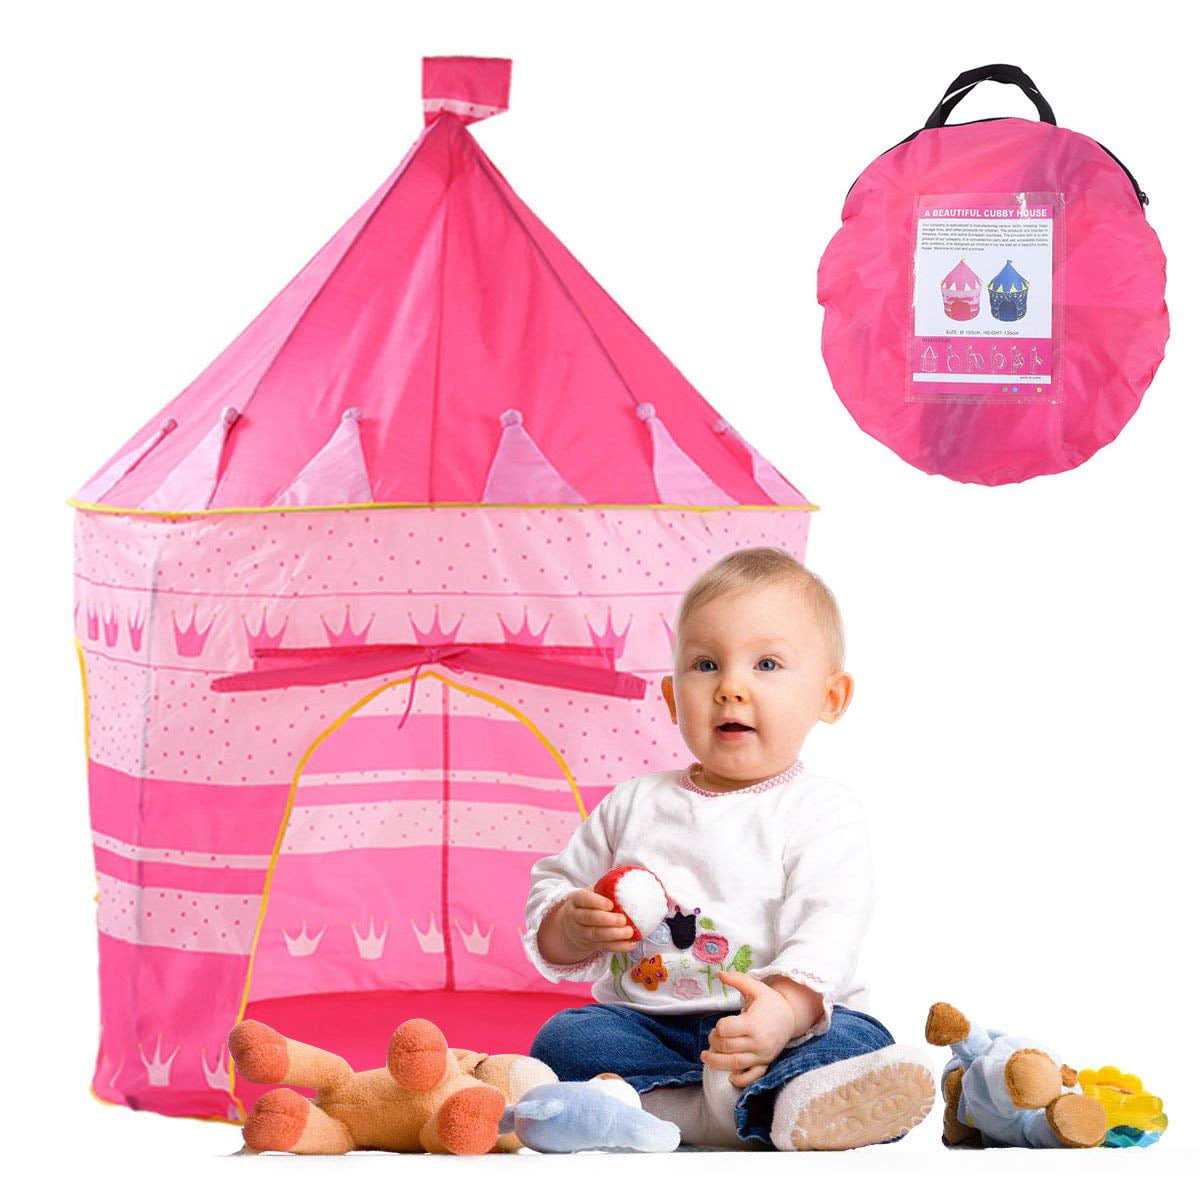 Portable Pink Folding Play Tent Kids Girl Princess Castle Fairy Cubby House 